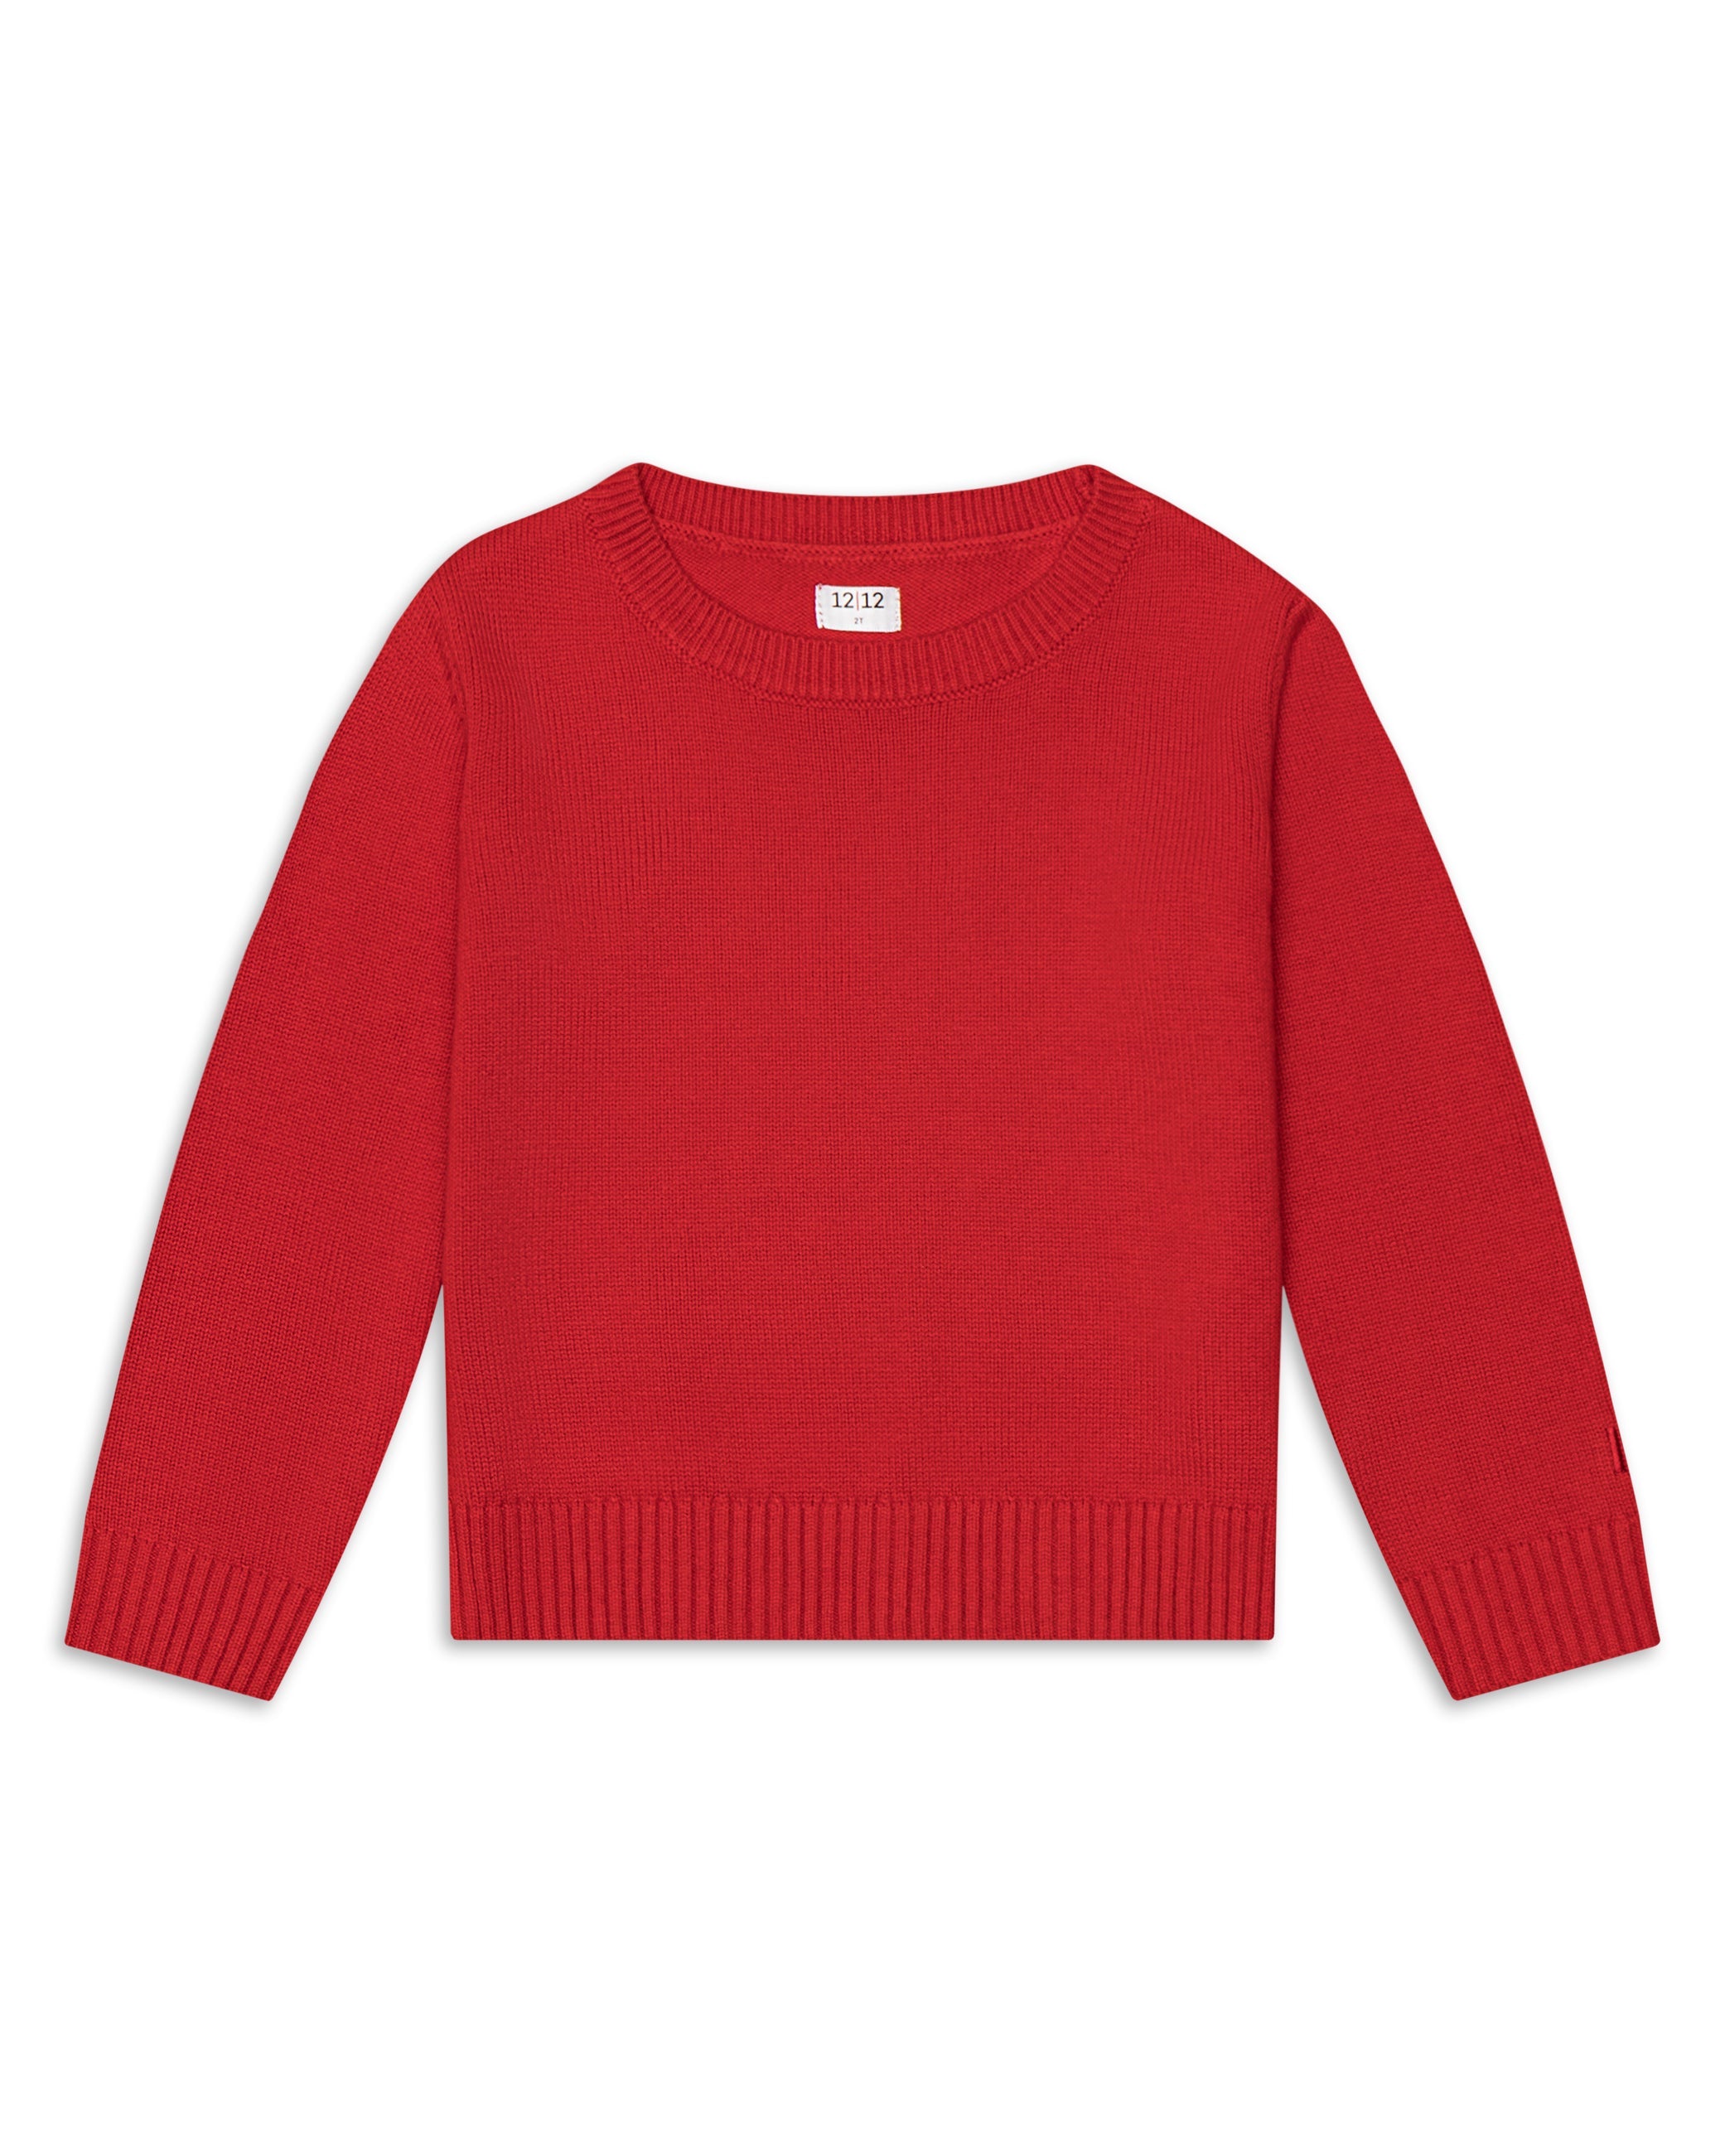 The Organic Crew Neck Sweater [Candy Red]